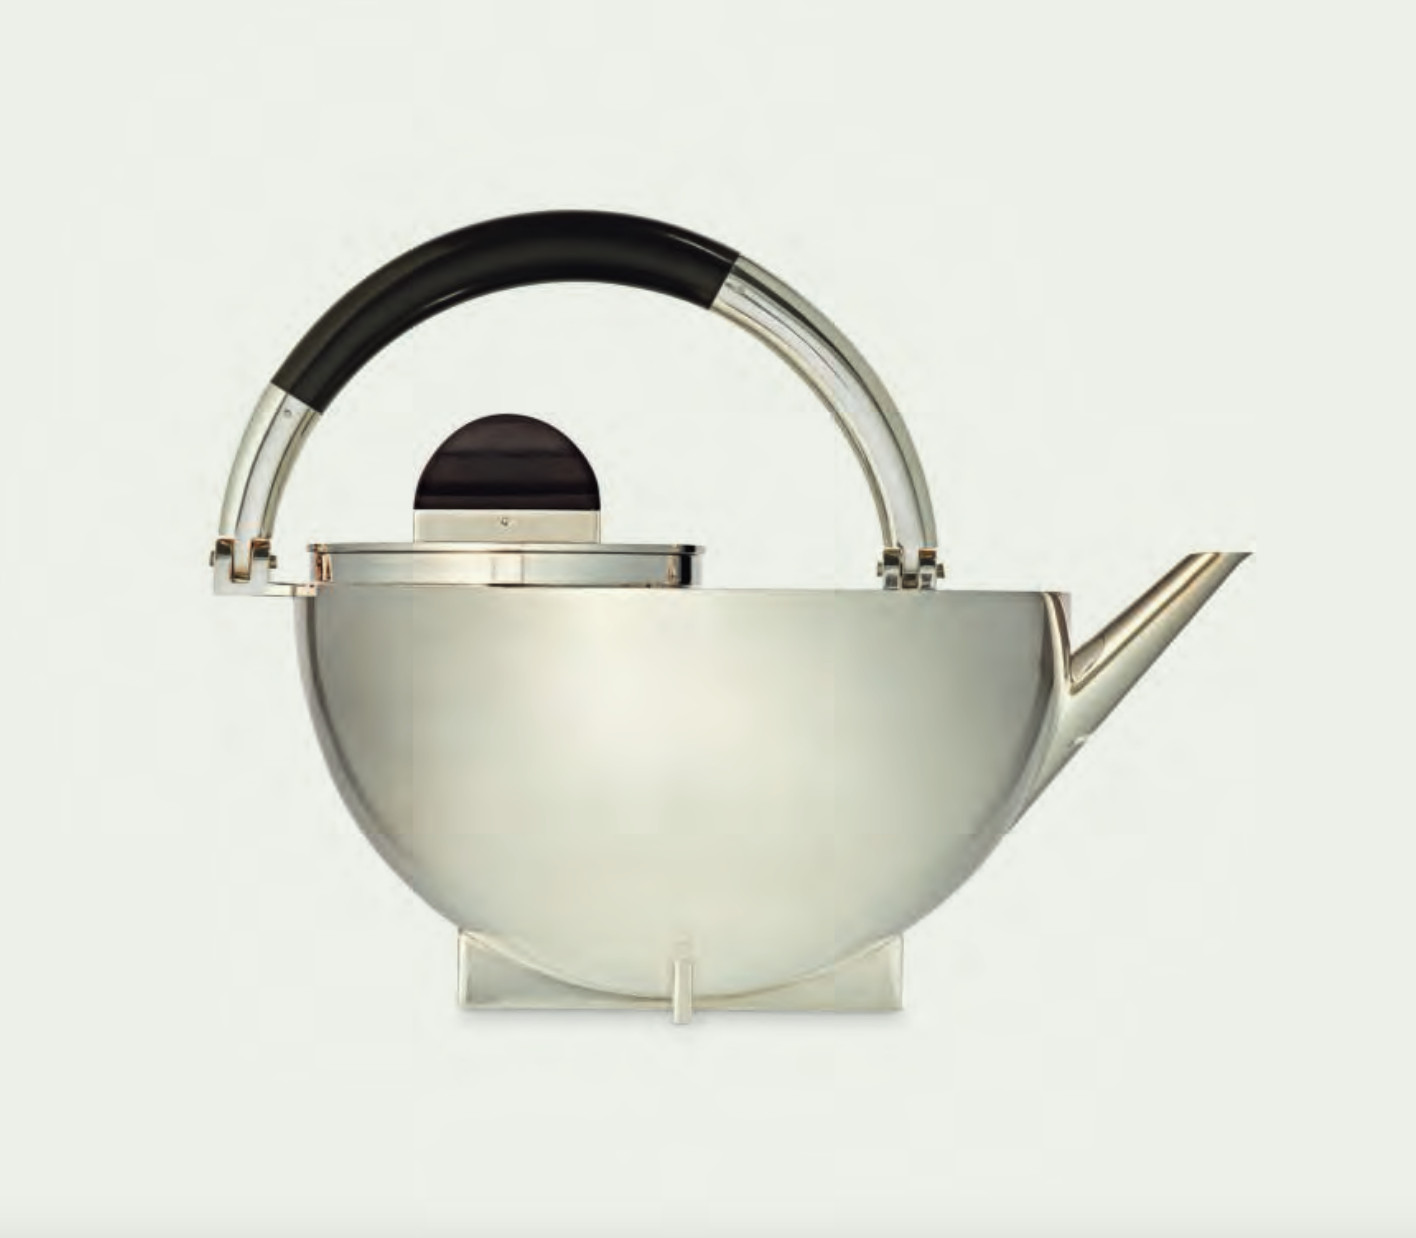 Kettle (1925–26) by Marianne Brandt. From Woman Made